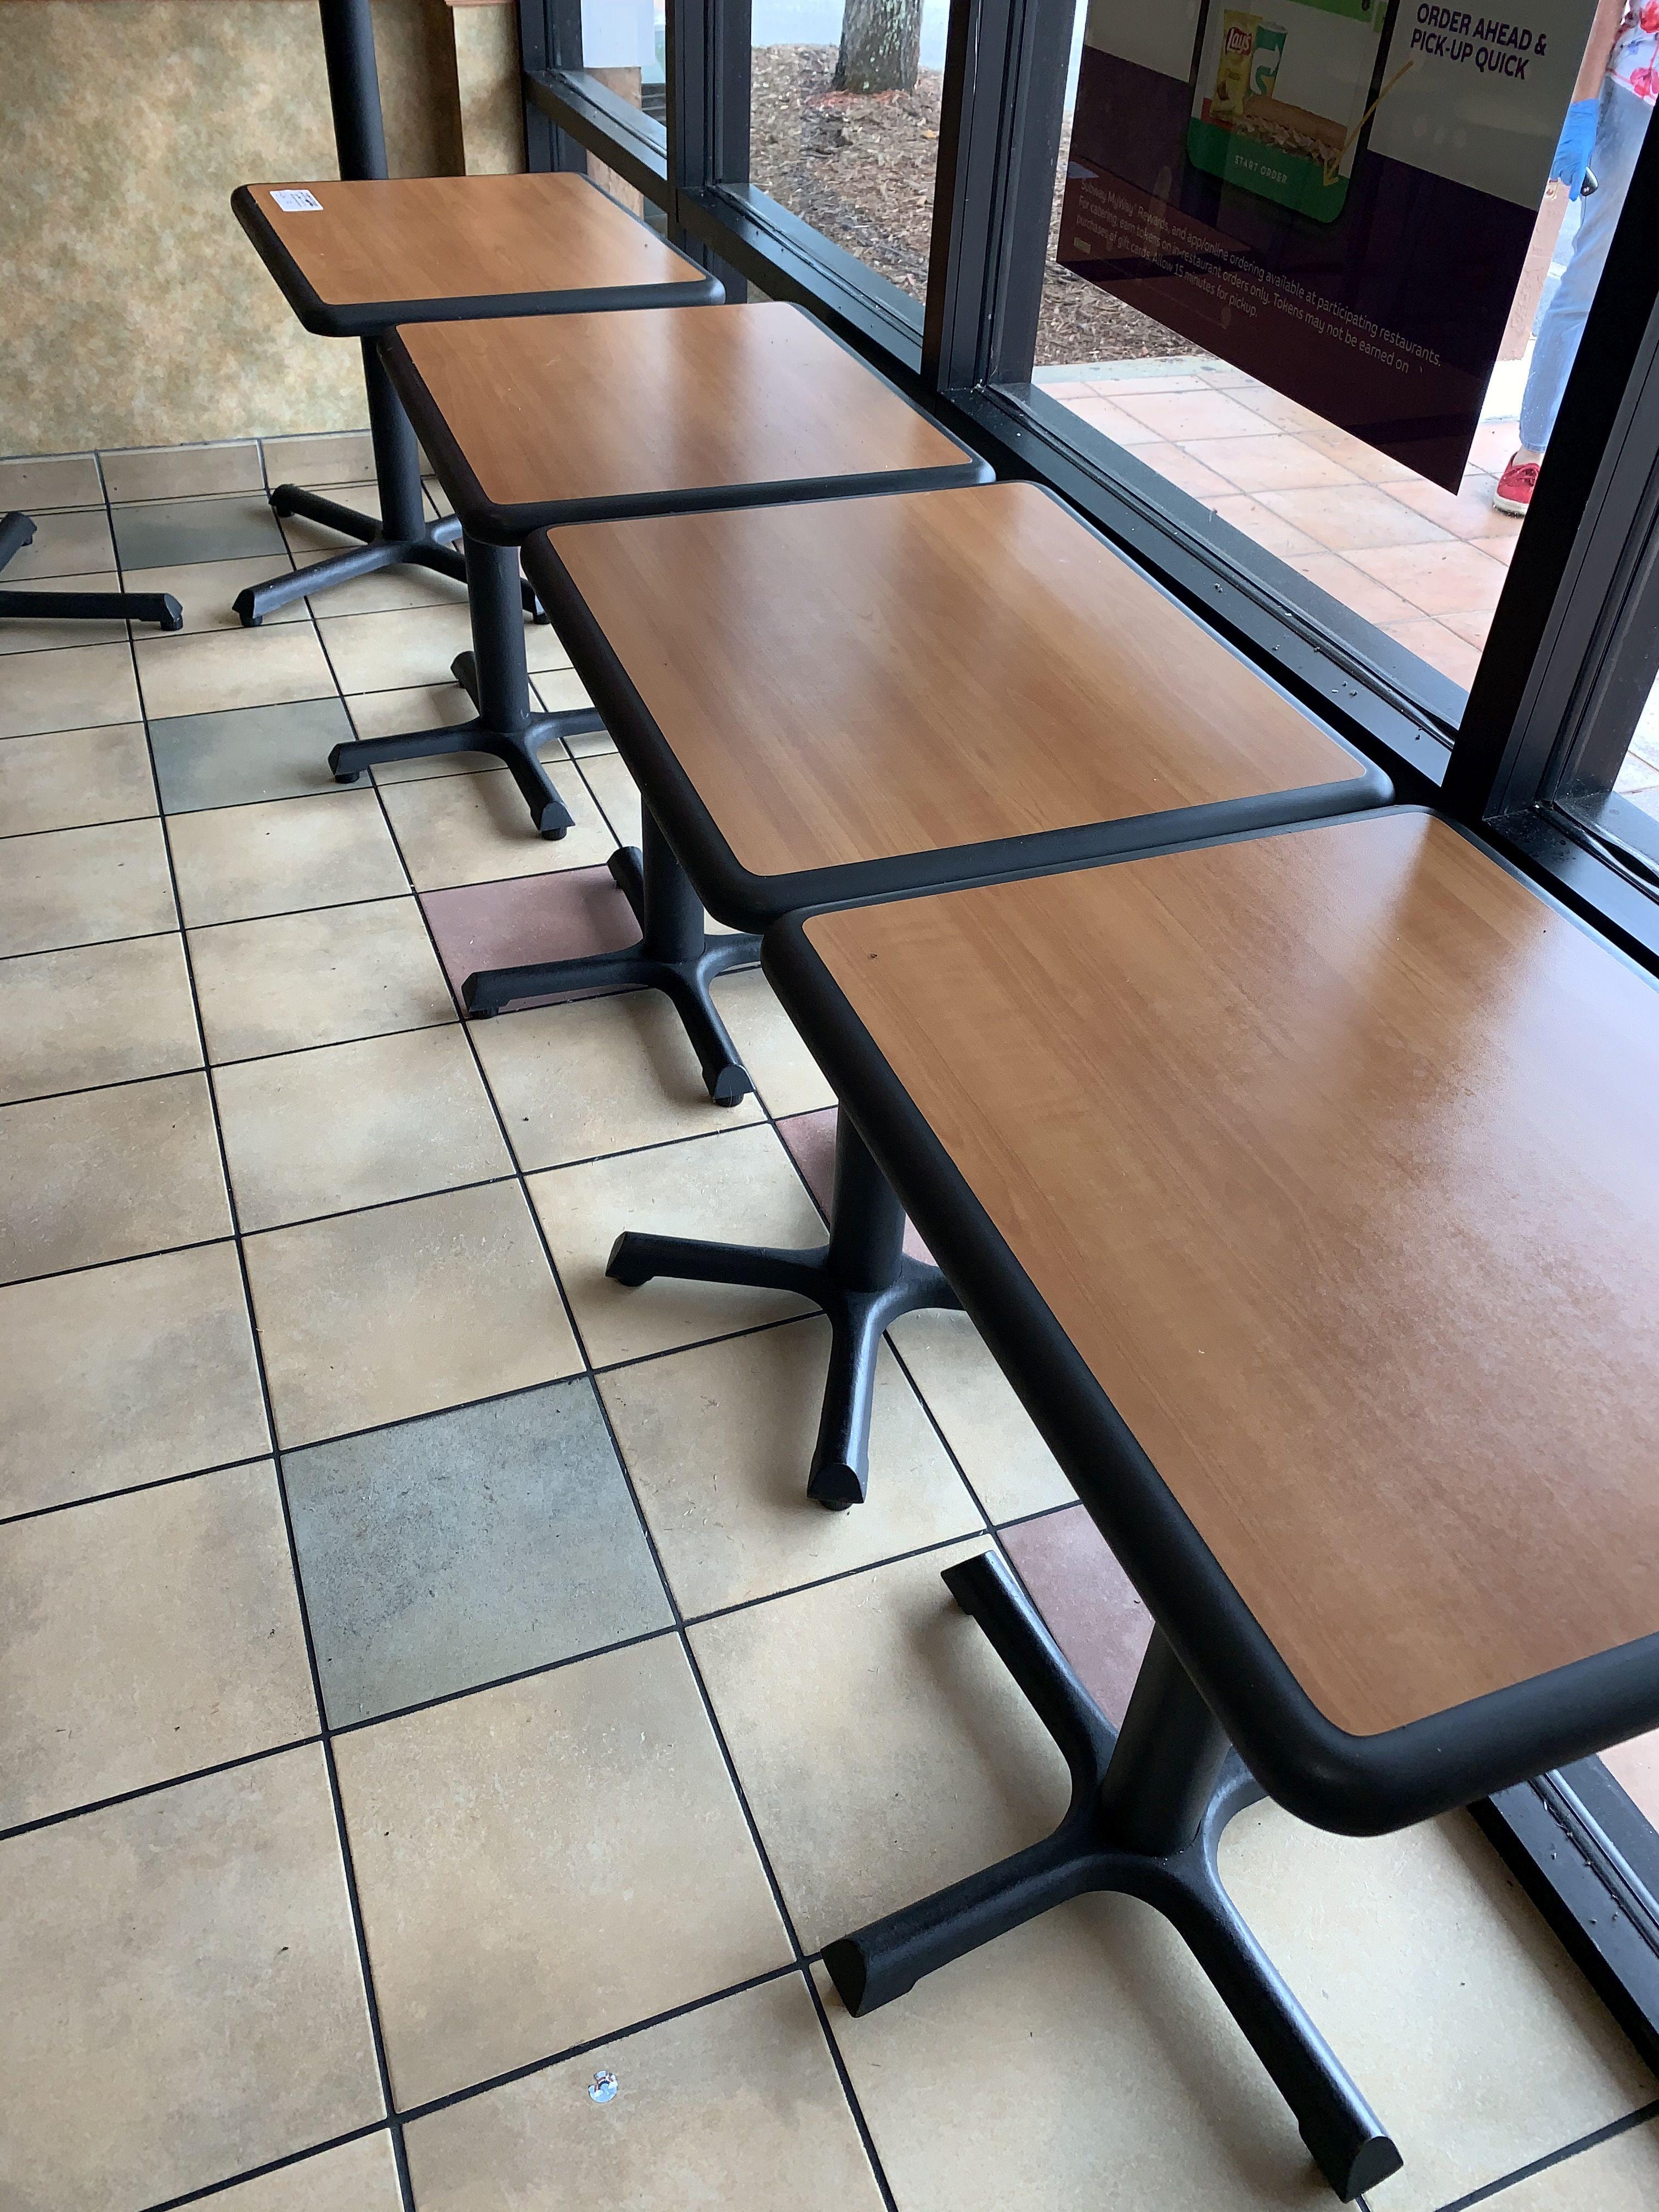 (10) 24" x 20" Two Top Tables with base plus (1) Four Top 30" x 42" marked Handicap